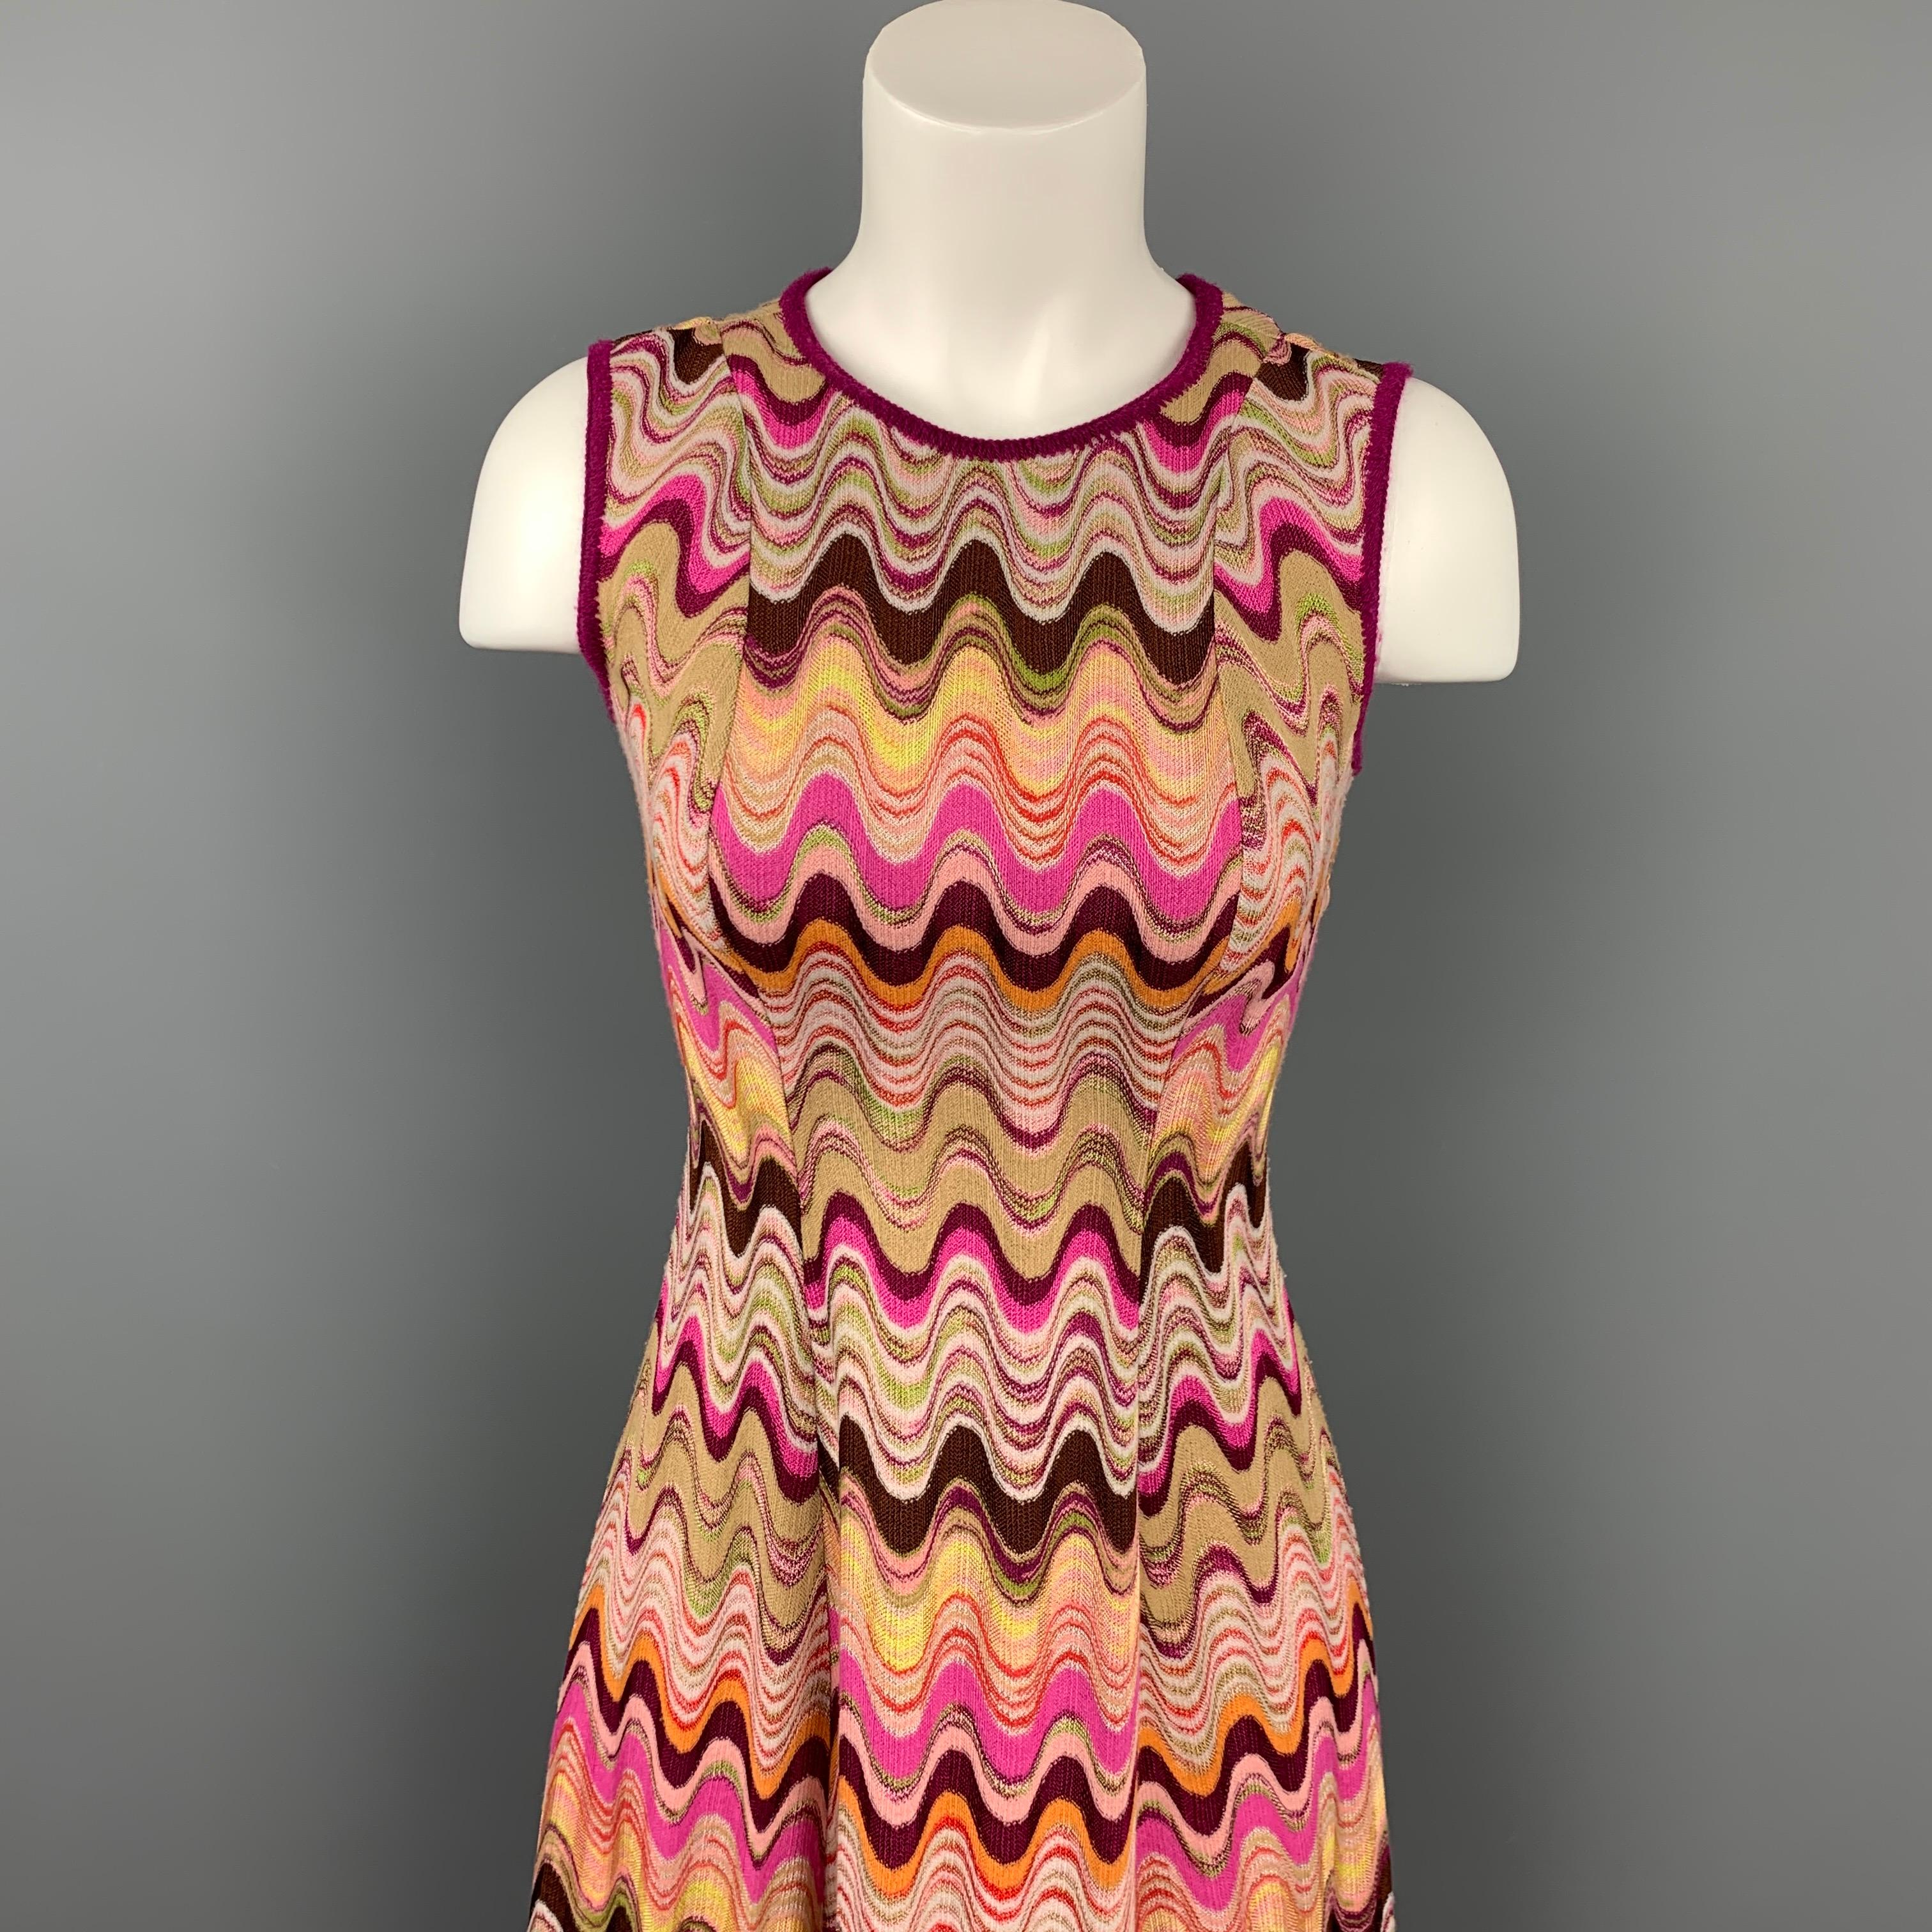 MISSONI dress comes in a multi-color zig zag rayon / wool featuring an a-line style, sleeveless, and a back button closure. Made in Italy.

Very Good Pre-Owned Condition.
Marked: 38

Measurements:

Bust: 30 in.
Waist: 26 in.
Hip: 36 in.
Length: 37